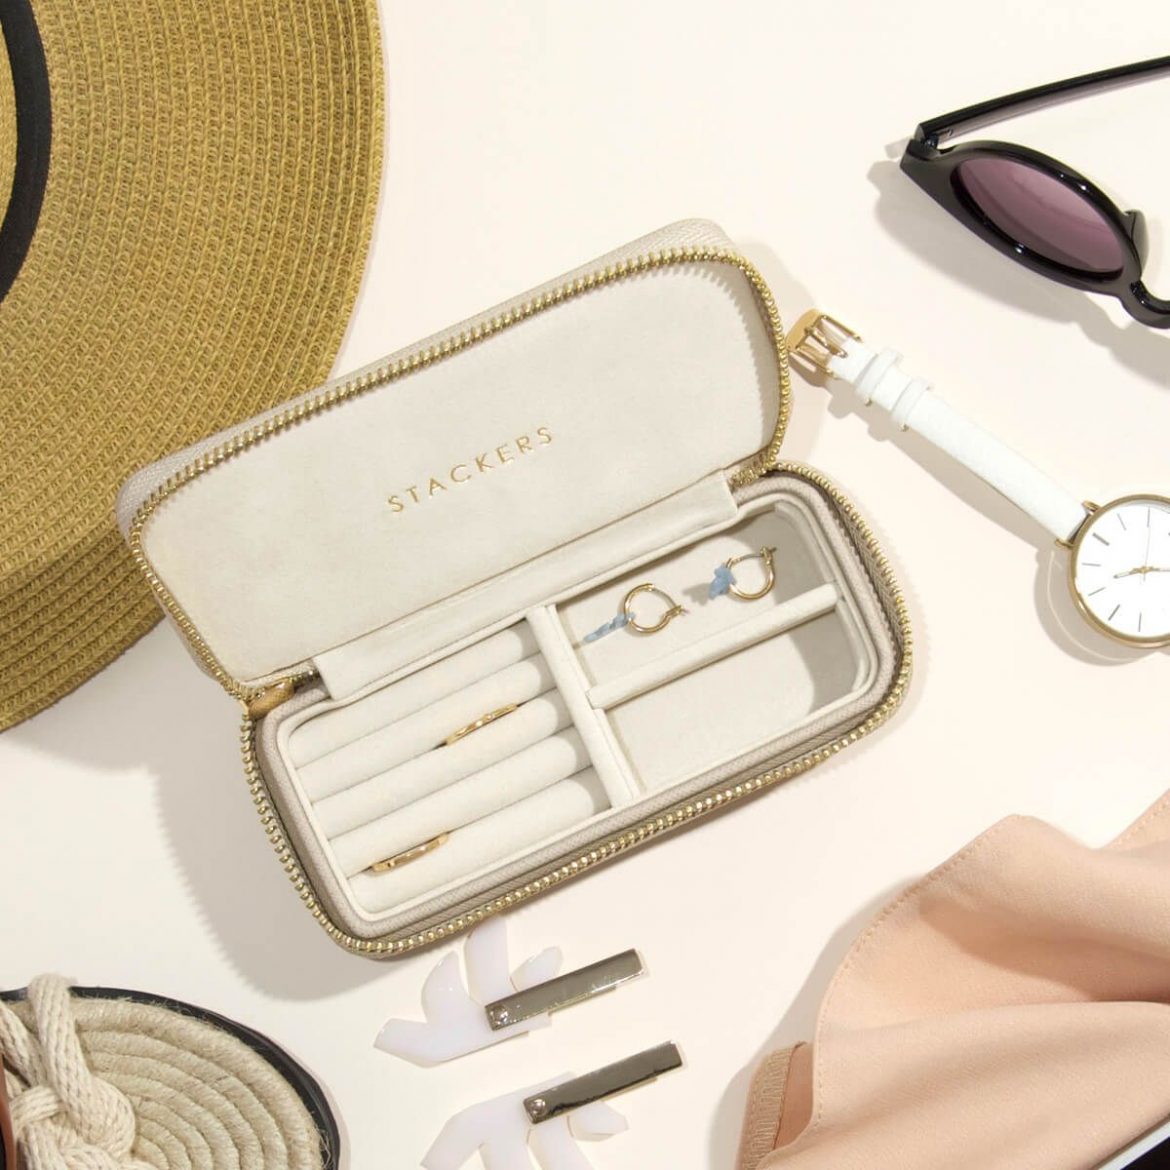 This collection of must-have travel essentials are simple yet important to have with you on your next holiday. Having these travel essentials on hand will make your next holiday the best one yet!